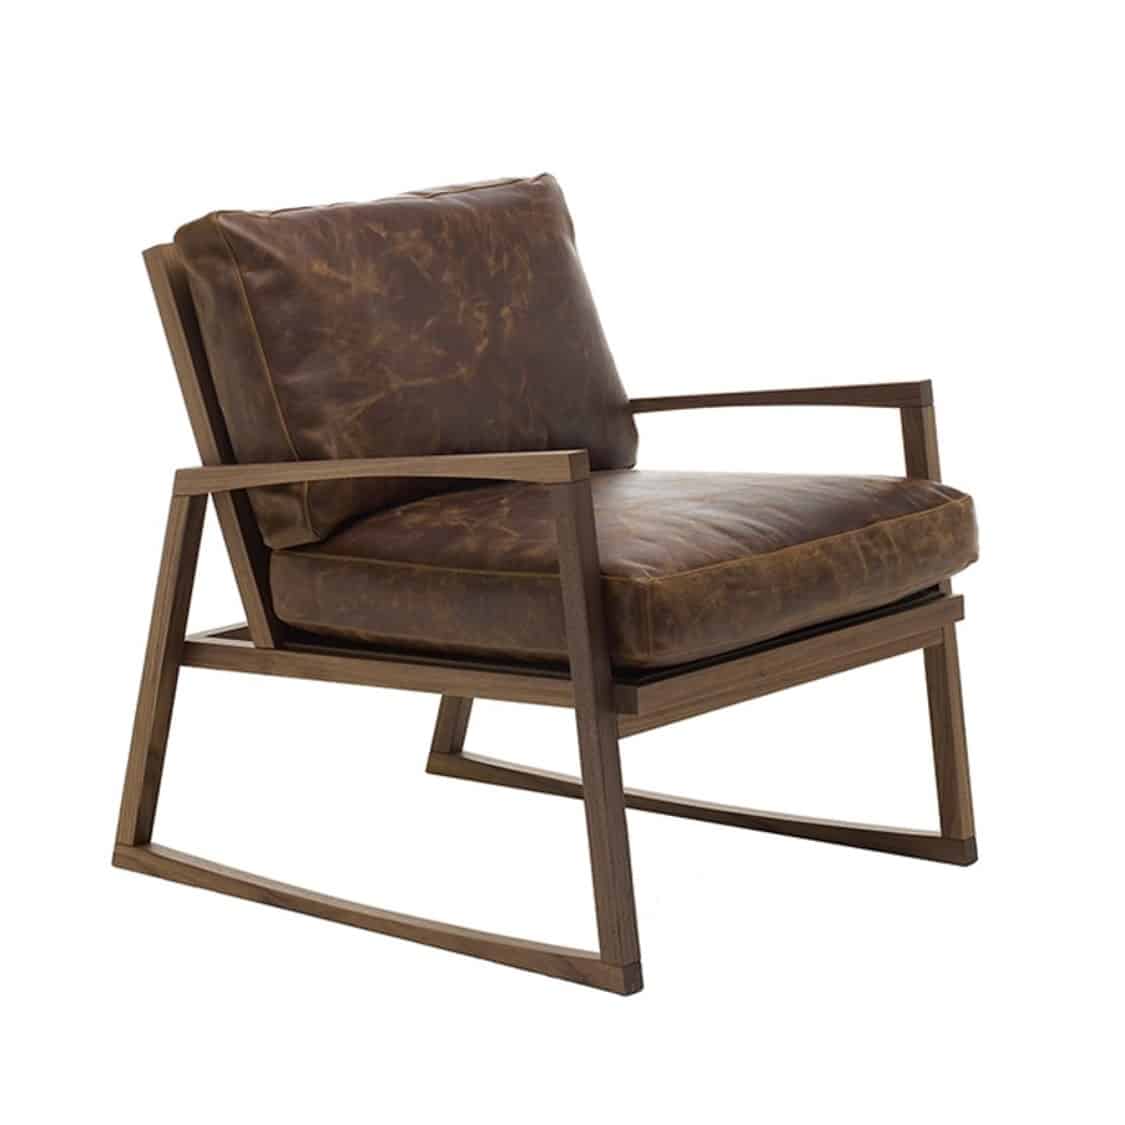 Yorkie lounge armchair brown leather wood frame contemporary